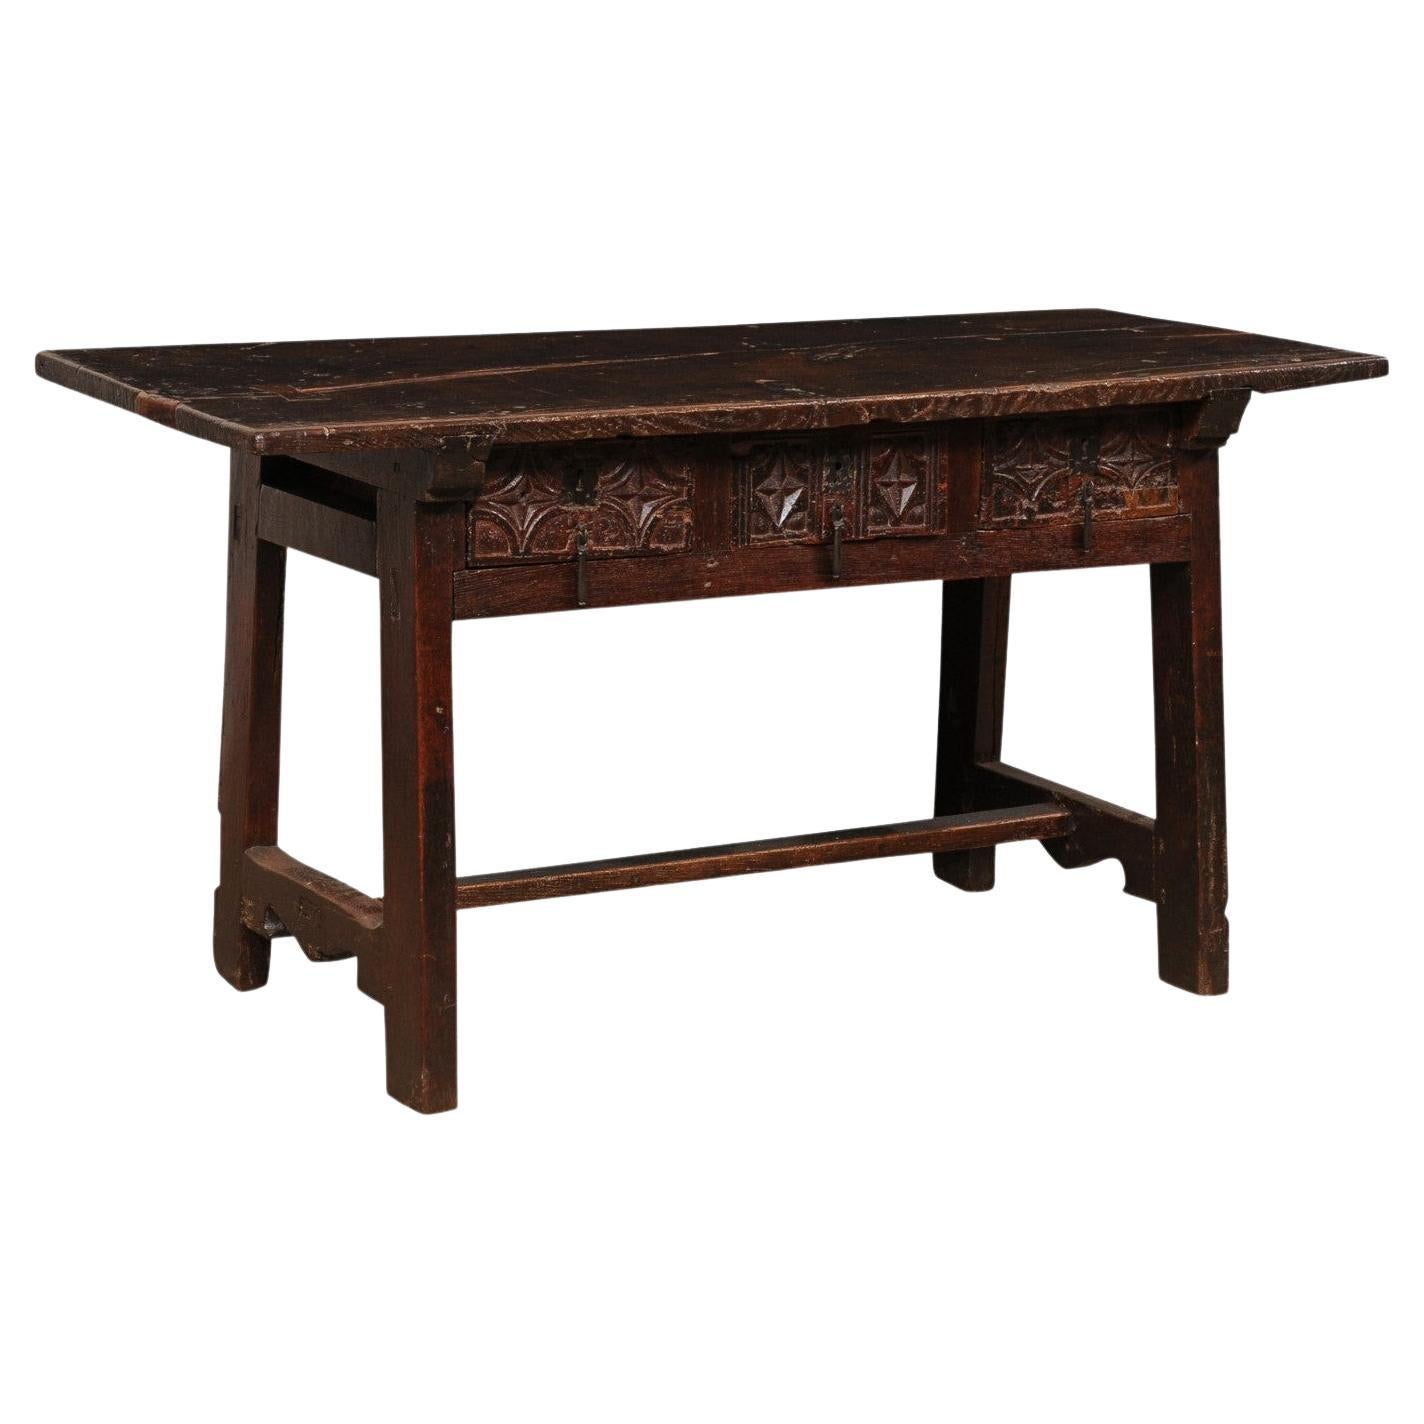 18th C. Spanish Beautifully Rustic Carved-Wood Trestle-Leg Table with Drawers For Sale